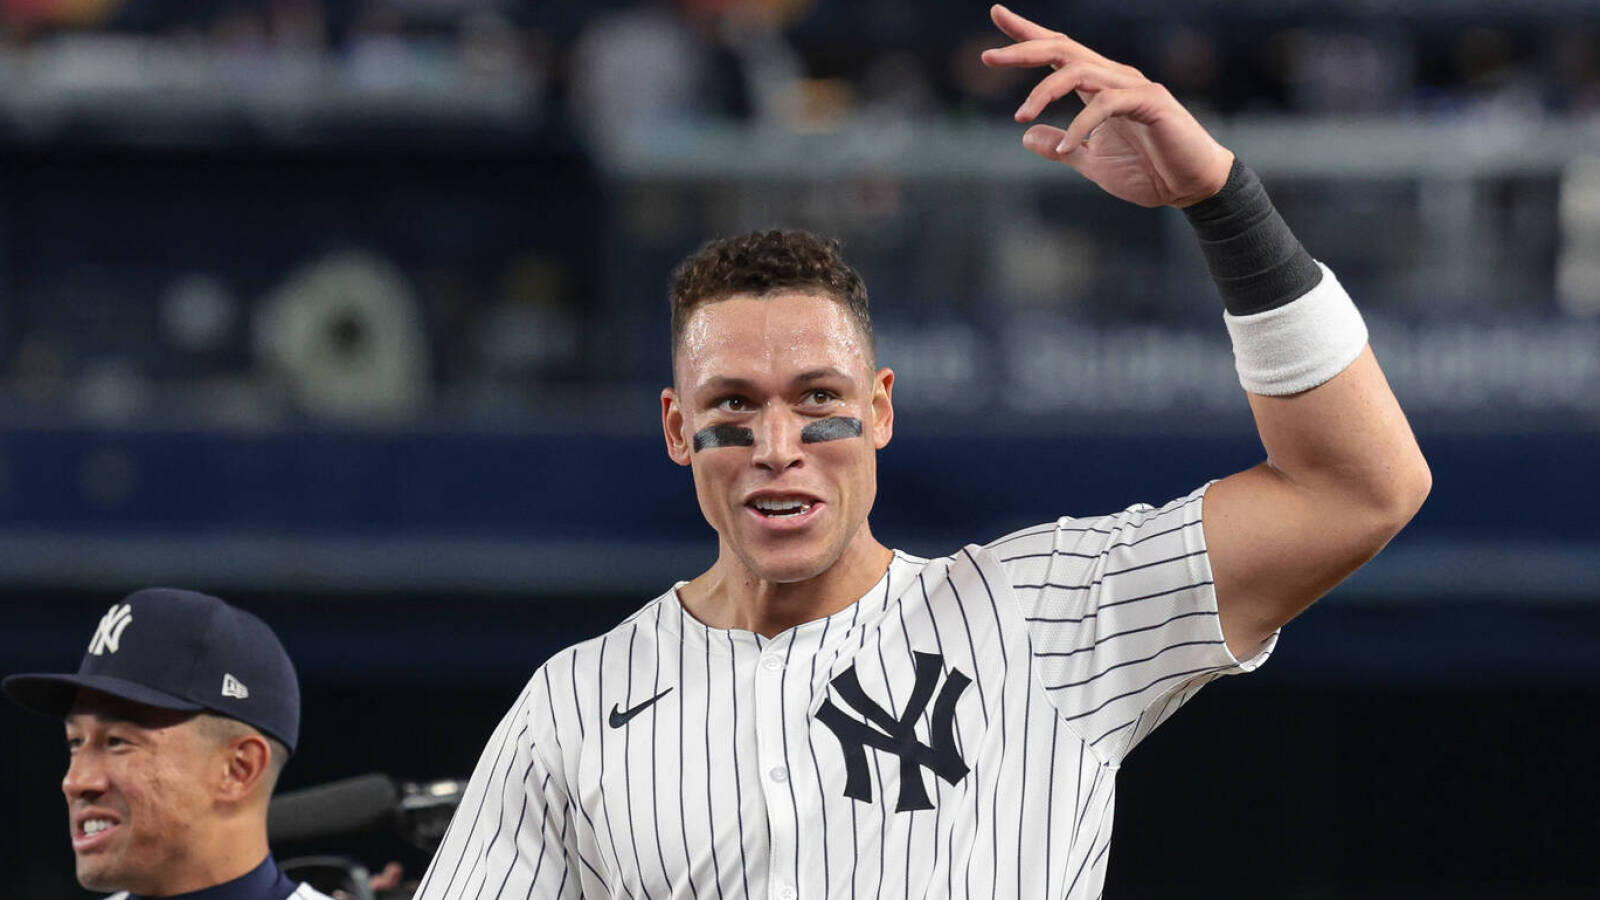 Watch: Yankees star Aaron Judge receives first career ejection after arguing called third strike